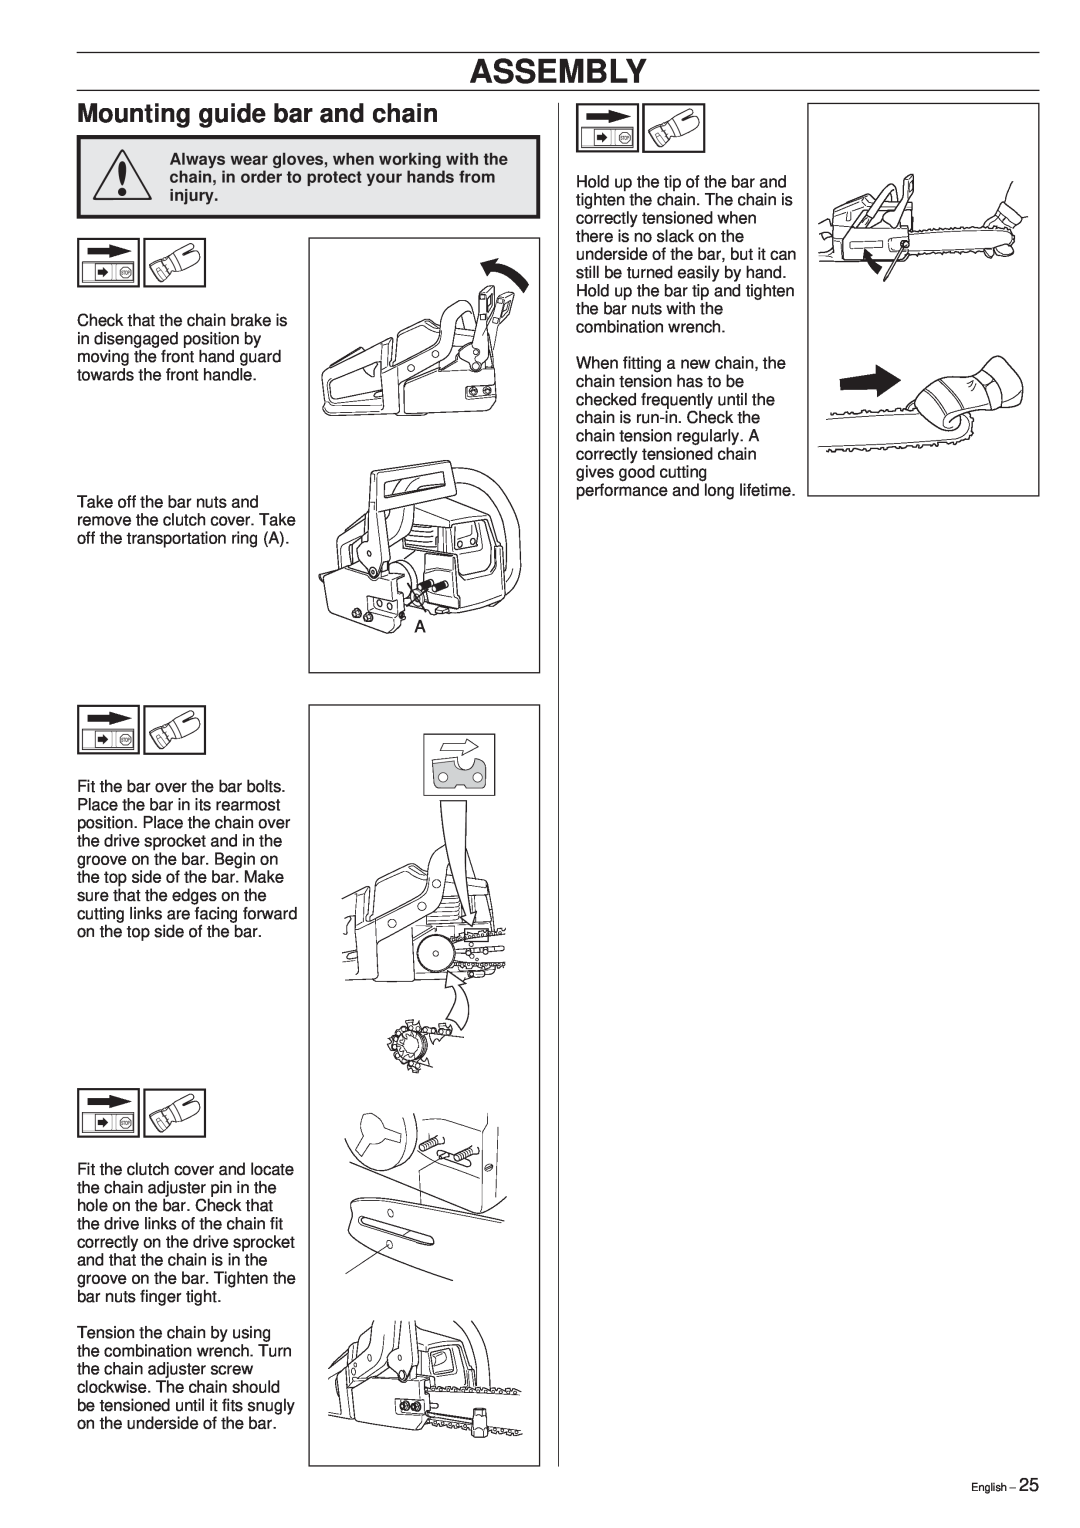 Husqvarna 45 manual Assembly, Mounting guide bar and chain 